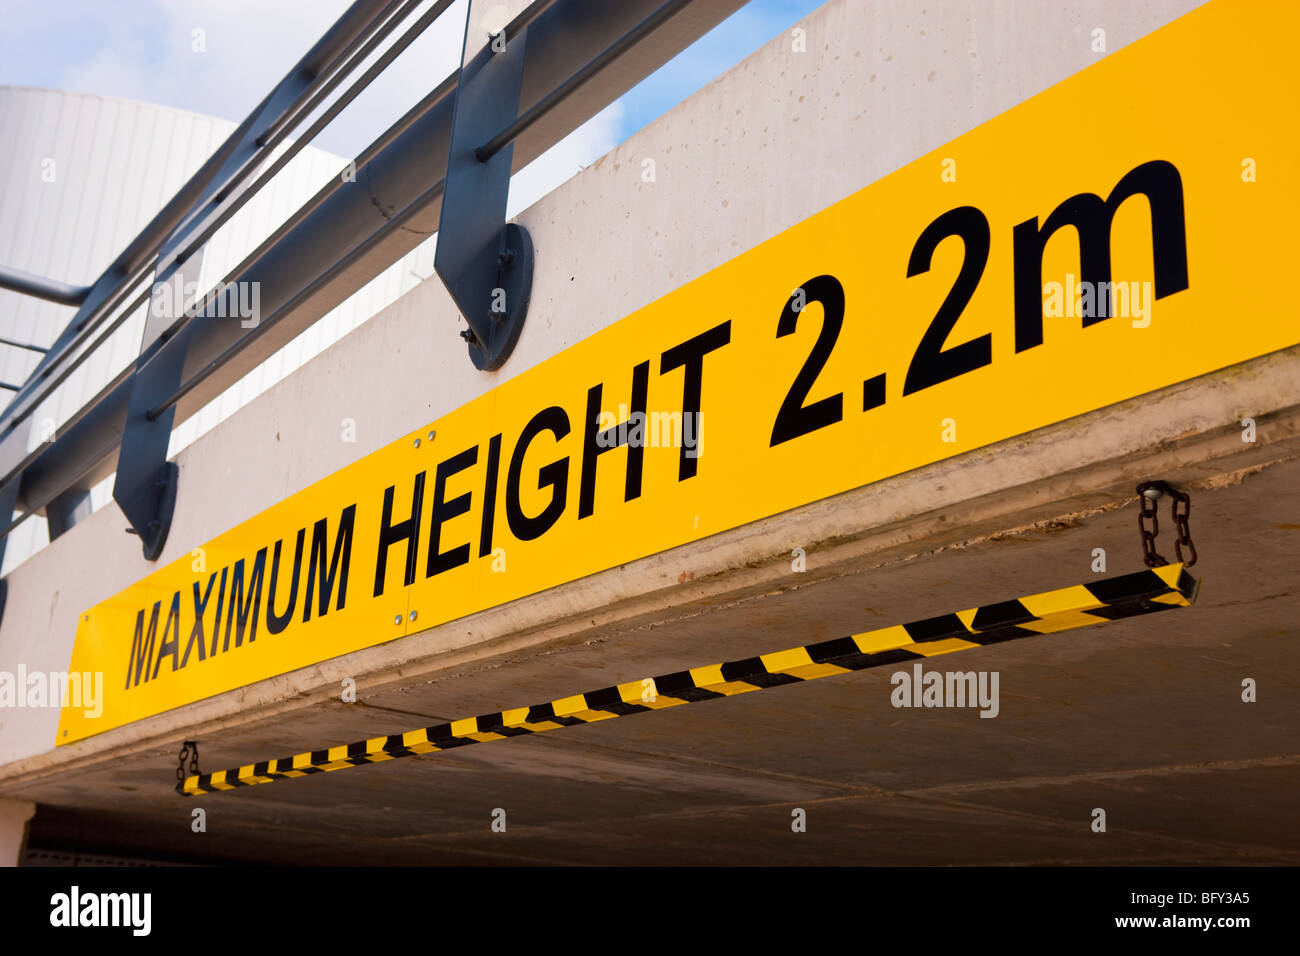 MAXIMUM HEIGHT OVERHEAD SIGN Parking Signs 